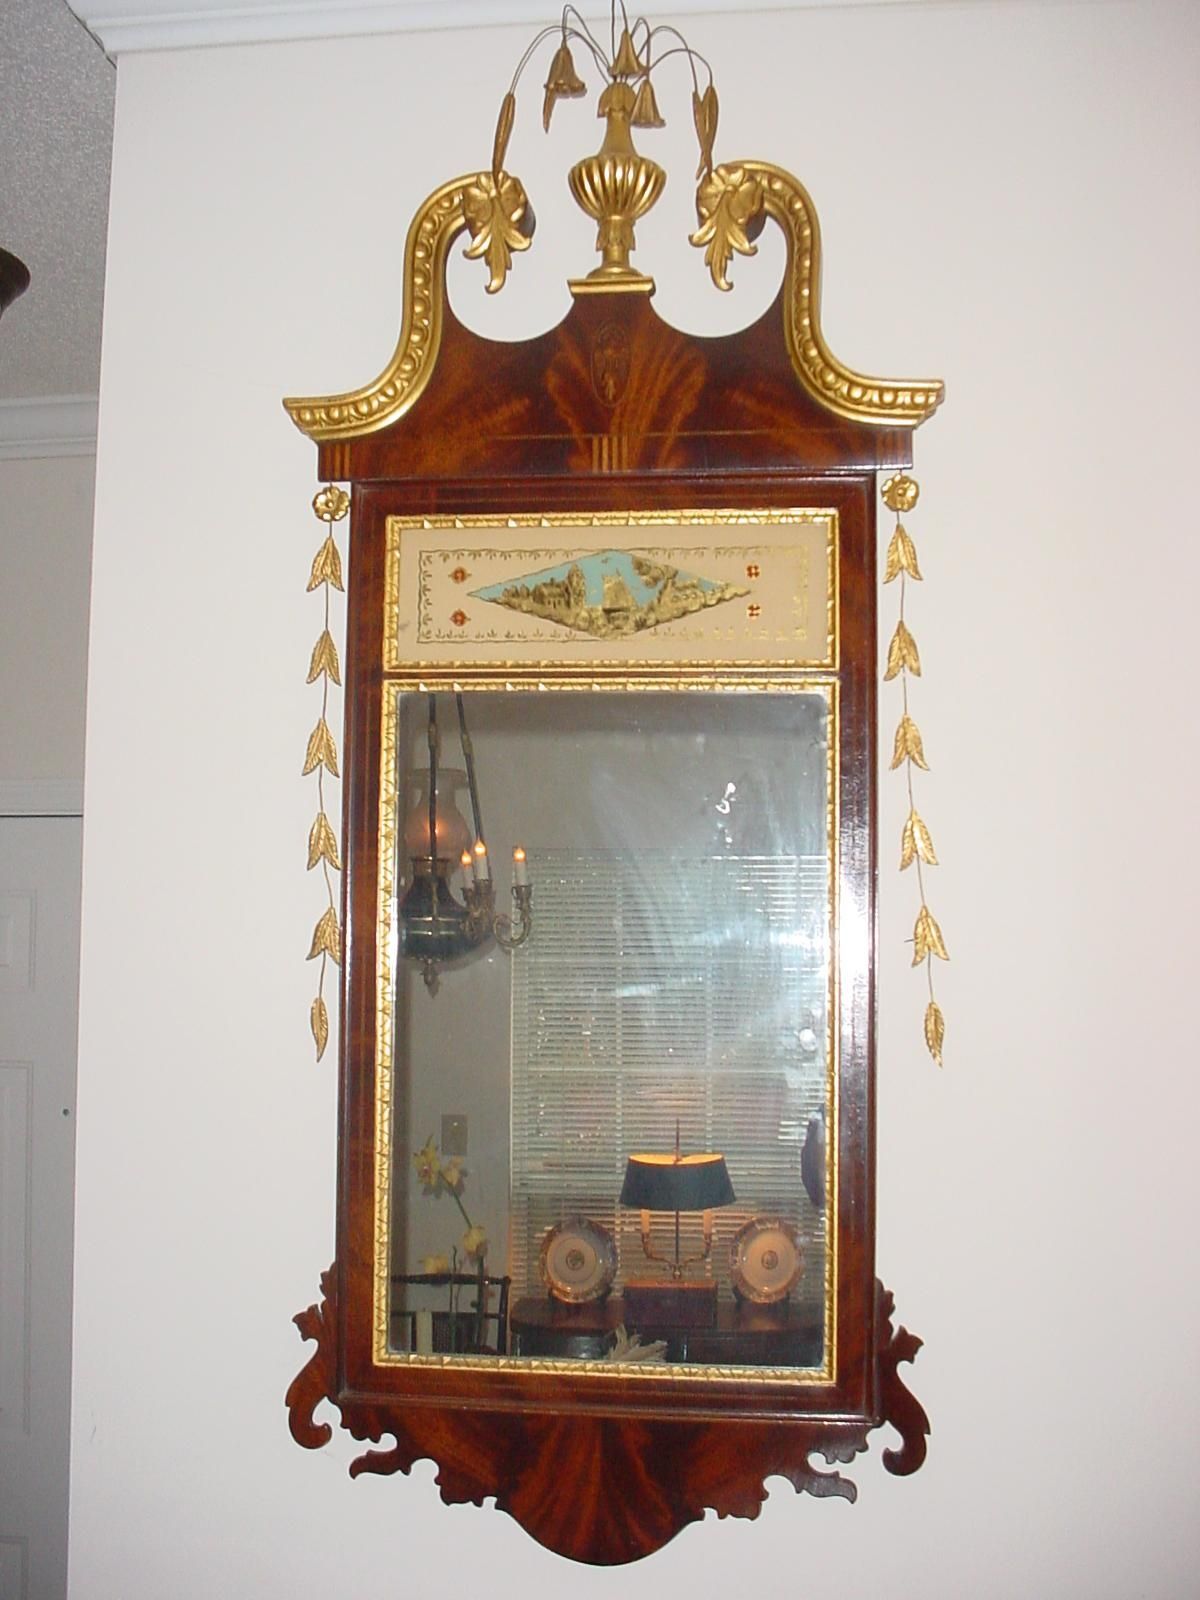 An American Federal Style Hepplewhite Mirror For Sale | Antiques In Antique Mirror For Sale (View 11 of 20)